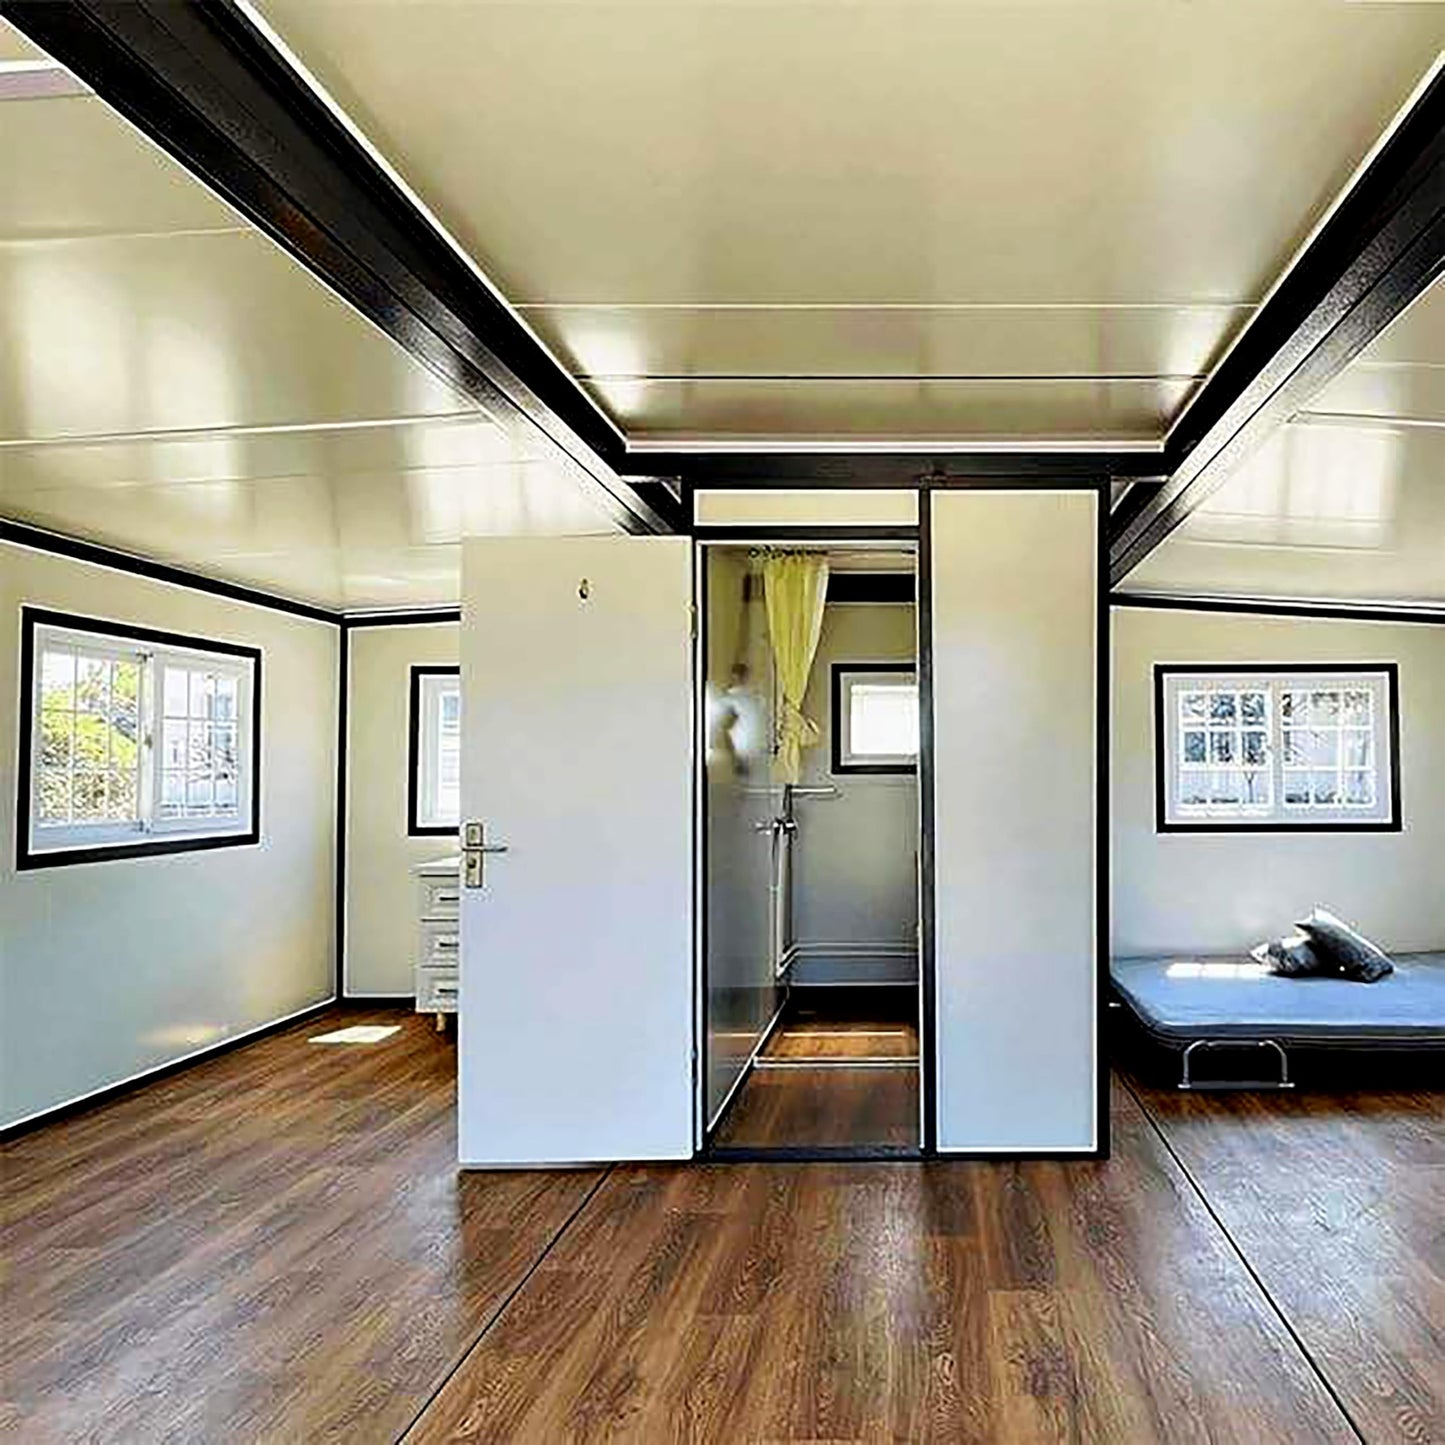 Innovative Prefab Tiny House - Portable Container Home for Sustainable Living - Expandable Design 19ft x 20ft